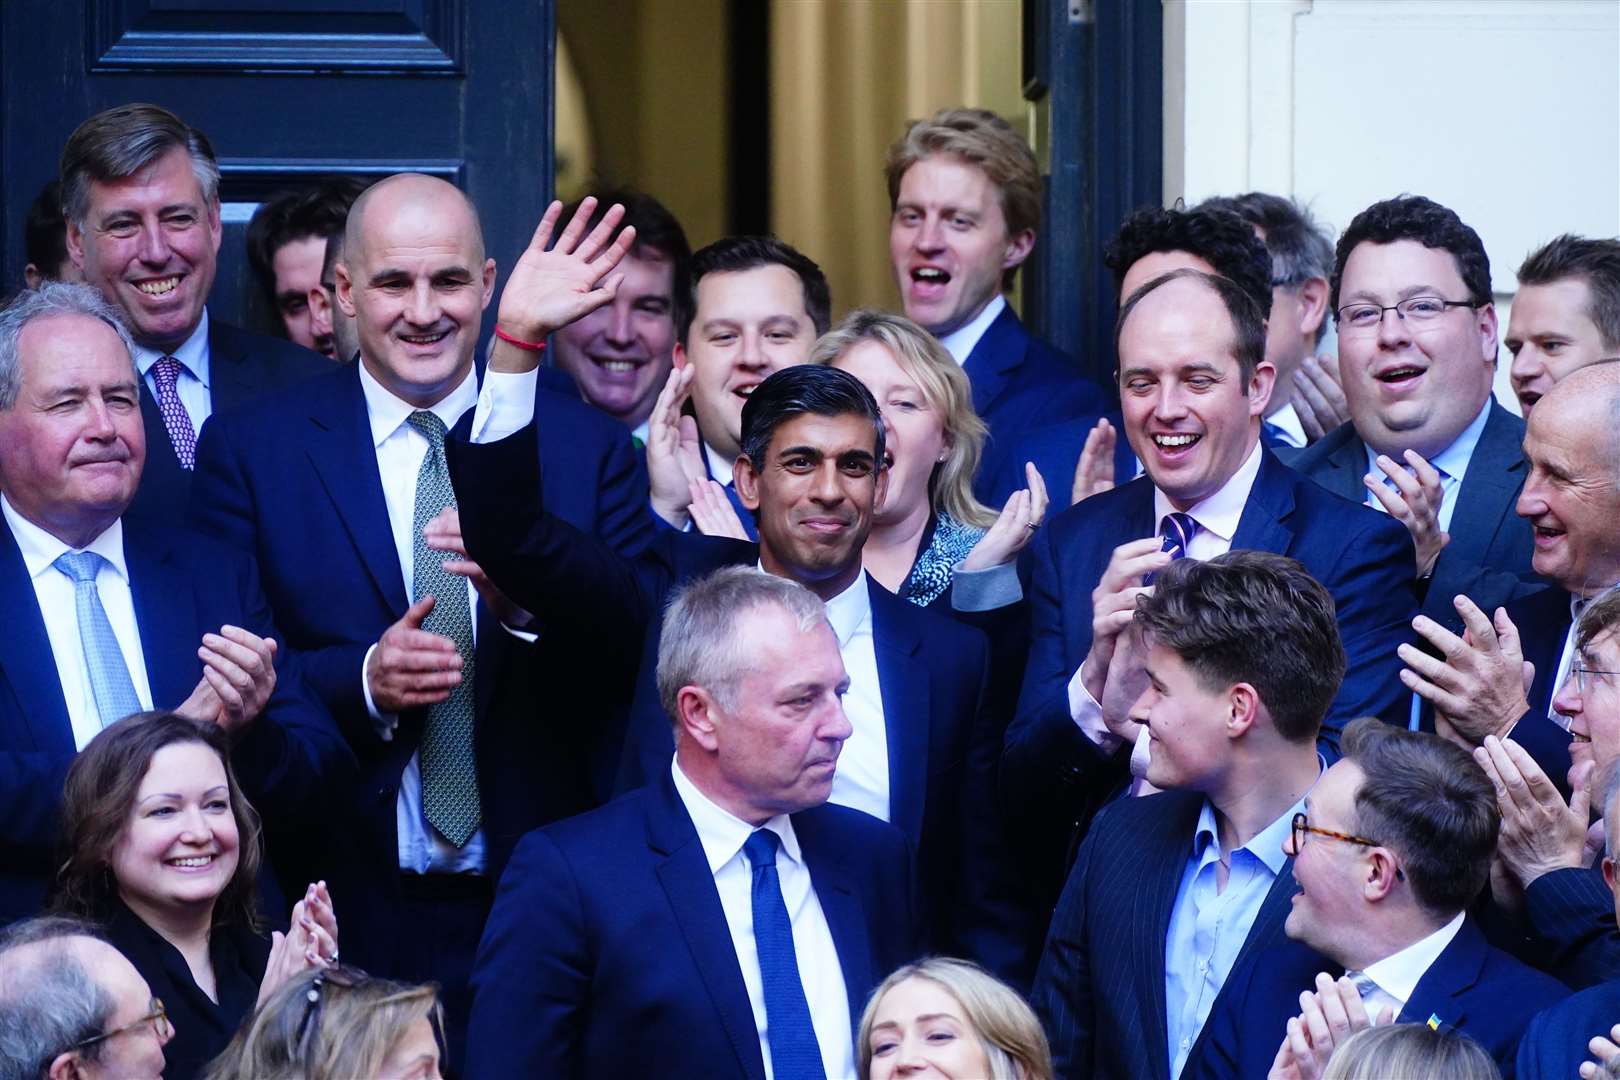 Rishi Sunak arrives at Conservative Party HQ in Westminster after it was announced he will become the new leader of the Conservative Party after rival Penny Mordaunt dropped out (Victoria Jones/PA)